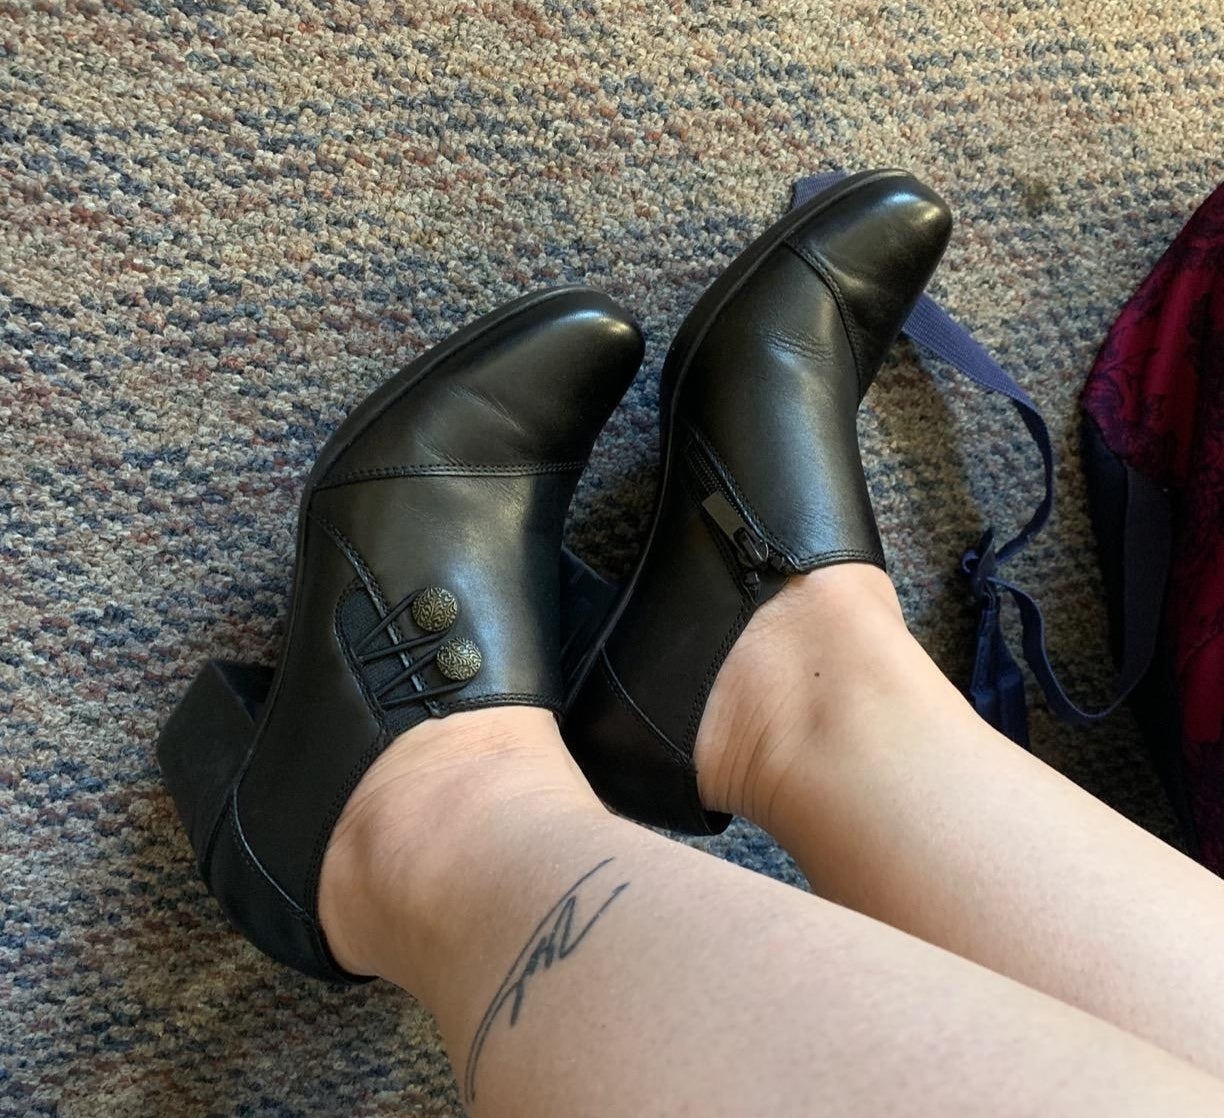 Reviewer in the black Clarks